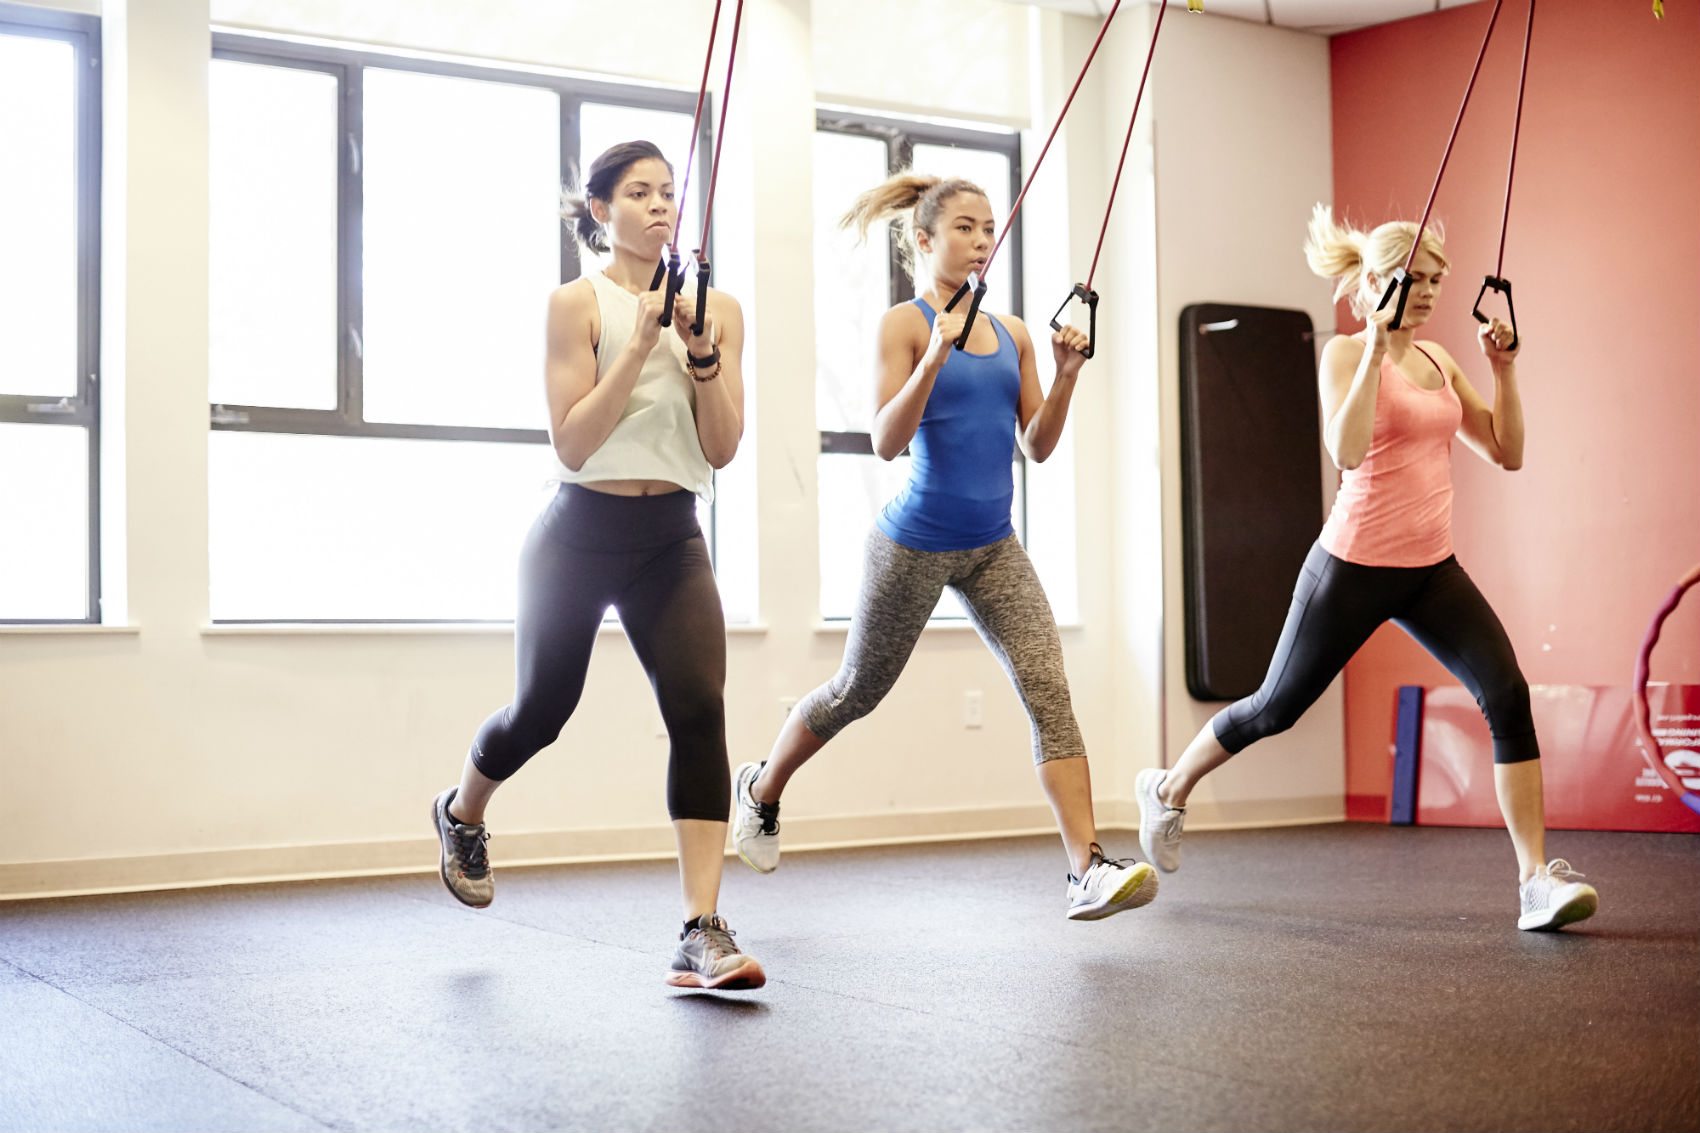 5 Reasons Why Small Groups Motivate More Than Working Out Alone